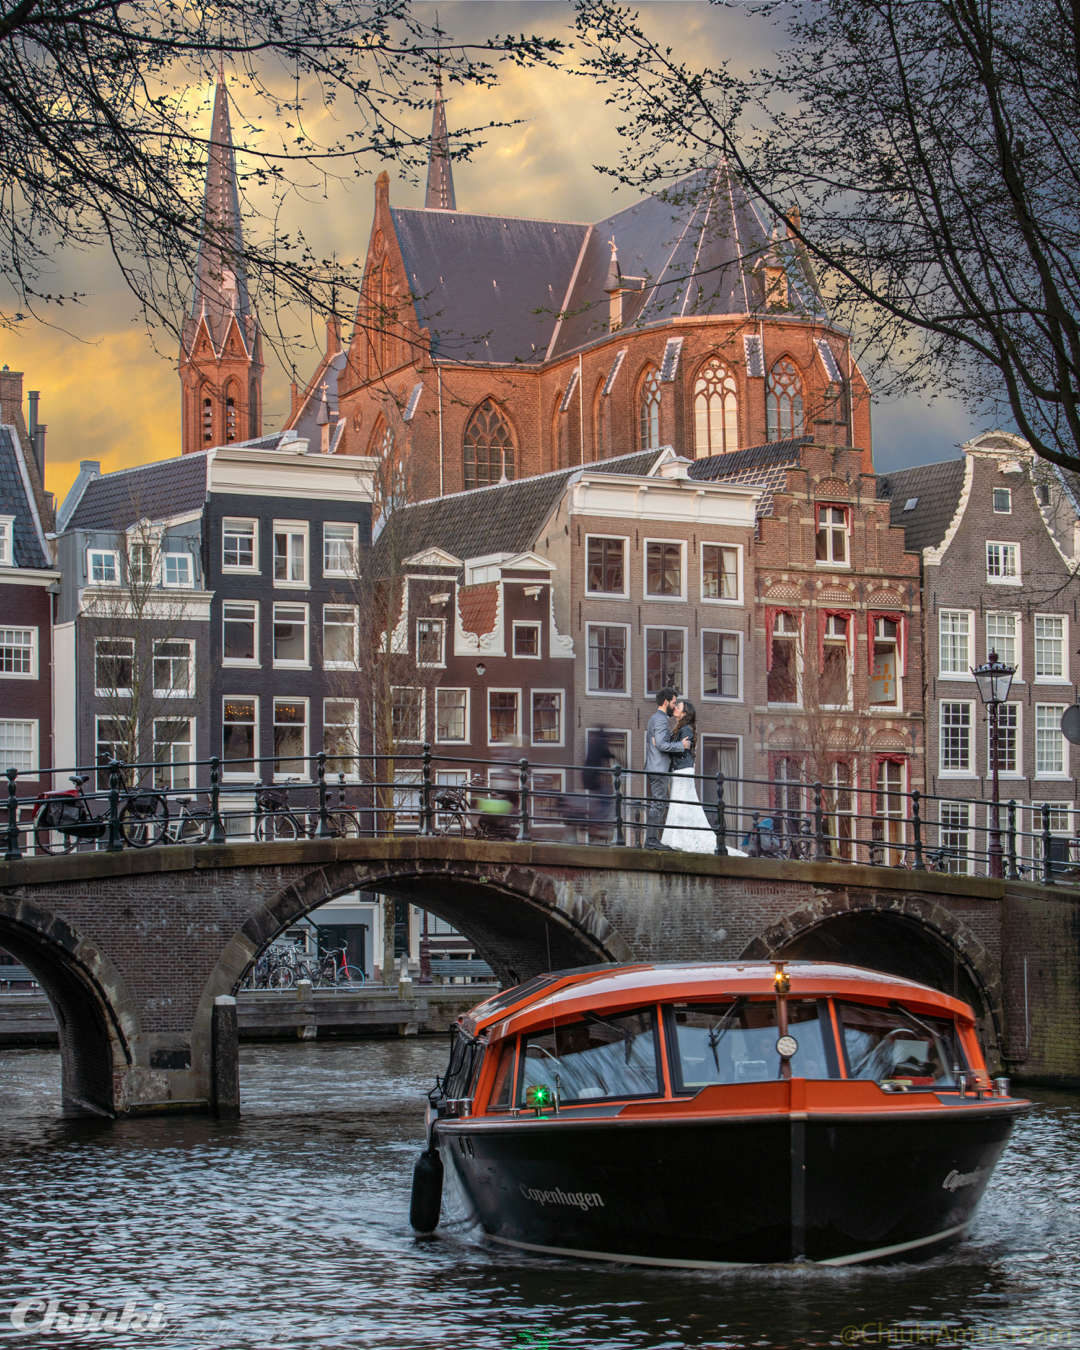 City Guide to Amsterdam